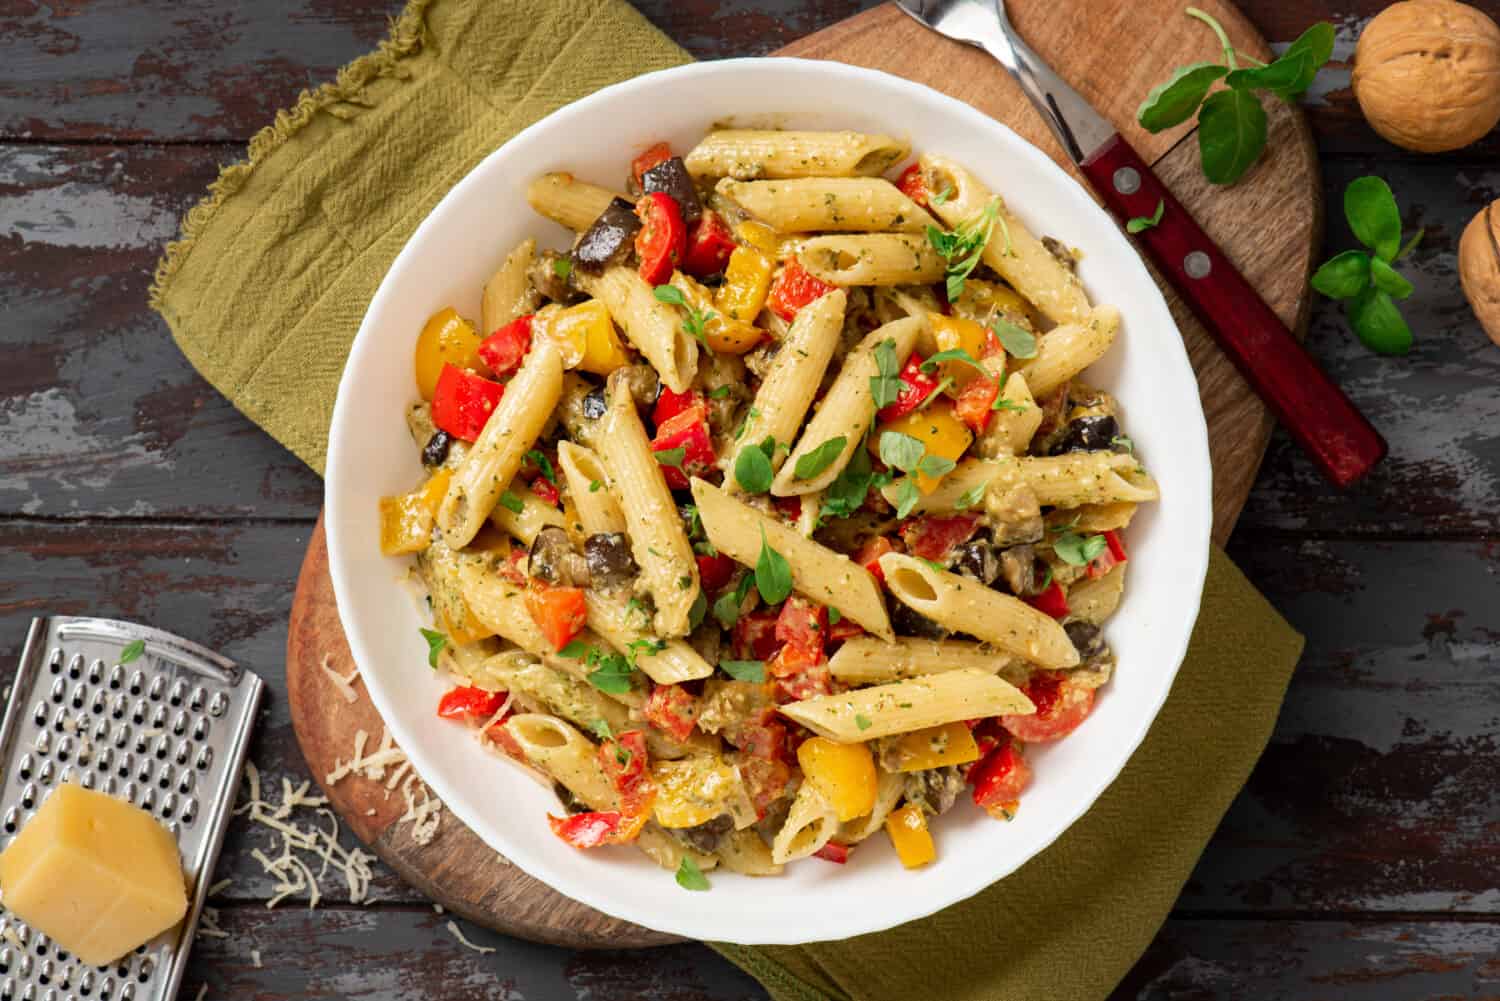 Pasta salad with baked vegetables. Penne pasta with baked peppers, eggplant, pesto and cheese in a white plate on a dark wooden table top view. Italian food. Rustic style. 